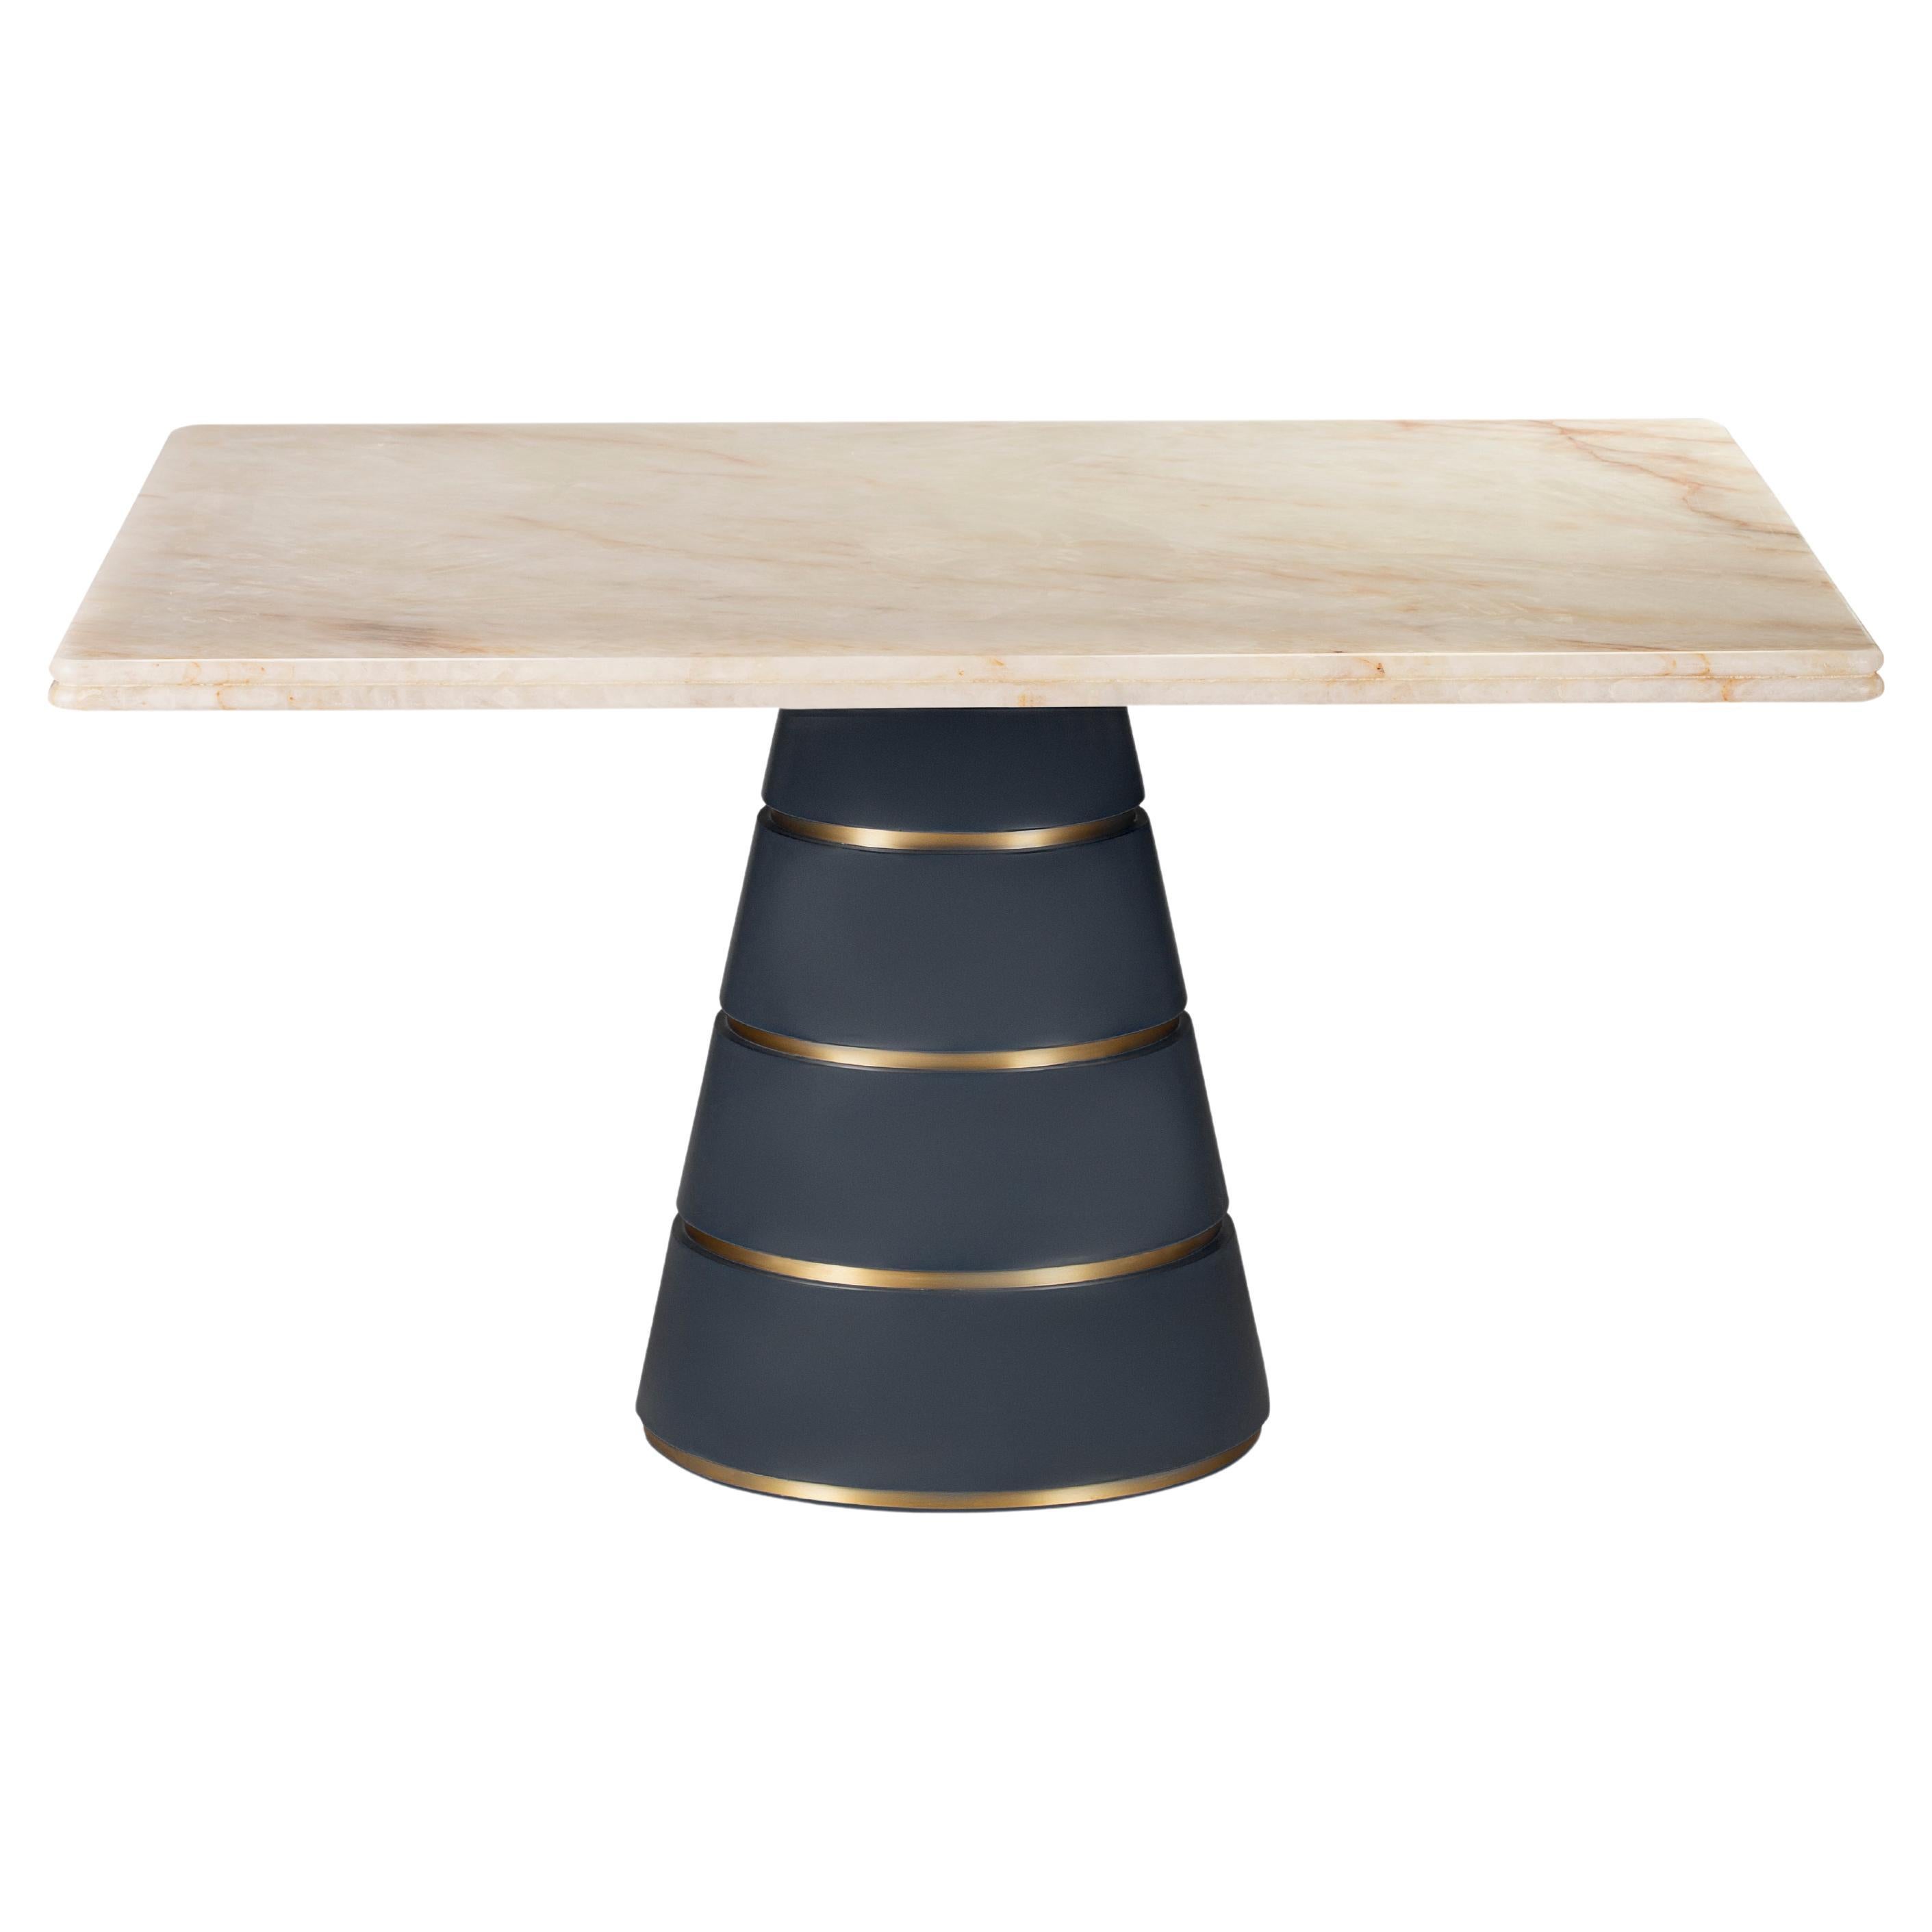 21st Century Vesubio Table, Backlit Quartz Top, Brass, Wood, Made in Italy For Sale